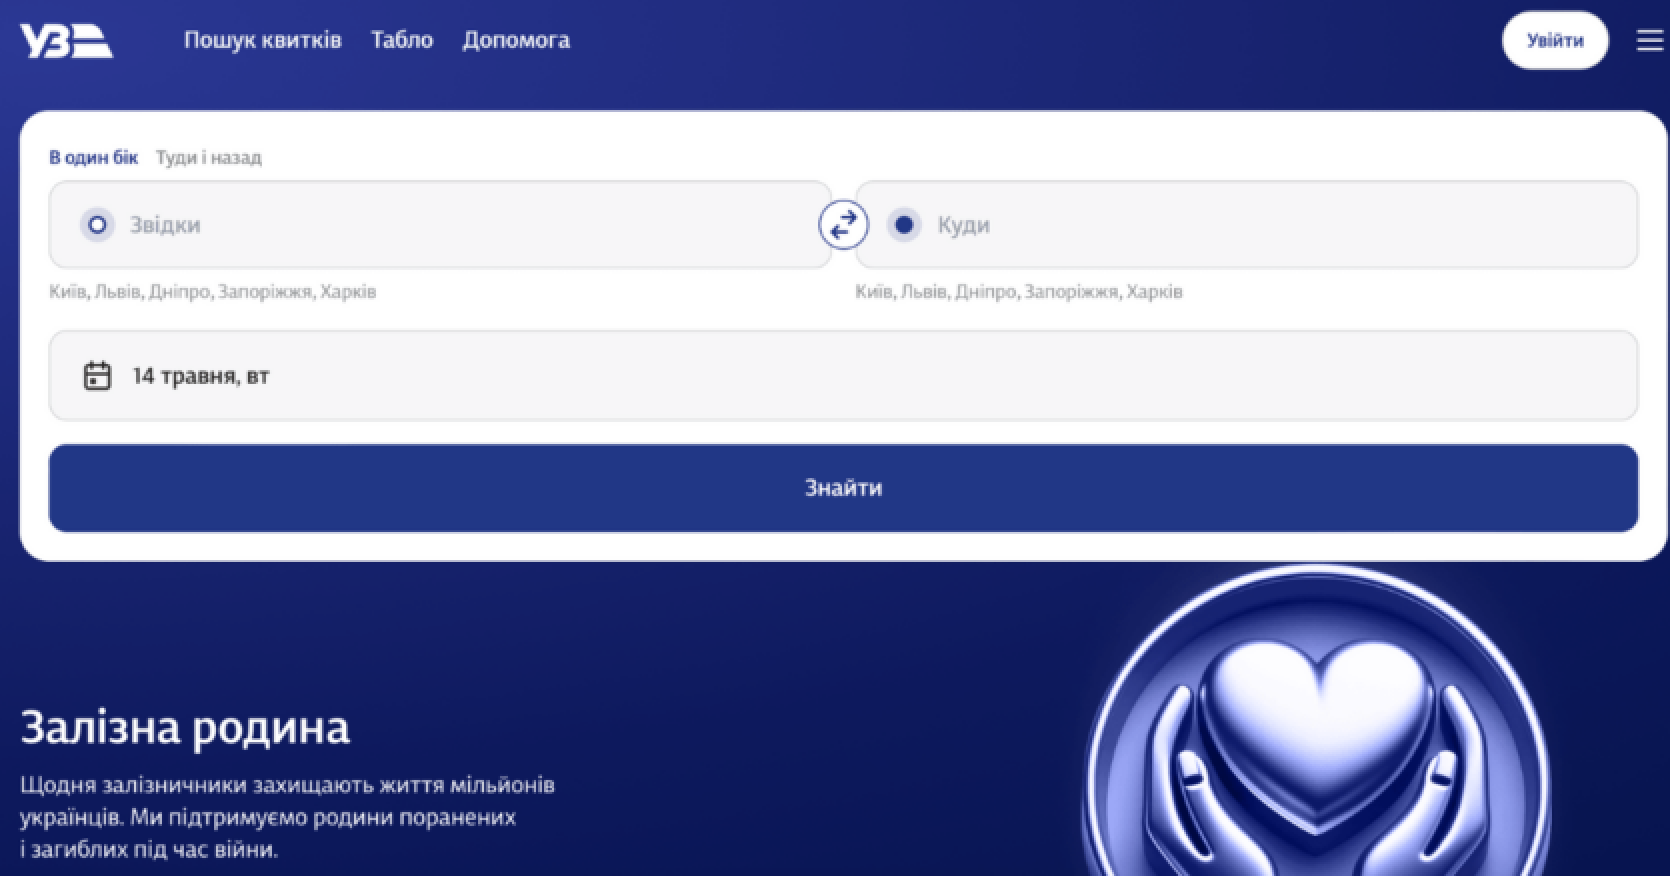 "Ukrzaliznytsia has upgraded its ticketing website with an updated interface, women's compartments and verification through Diia.Signature